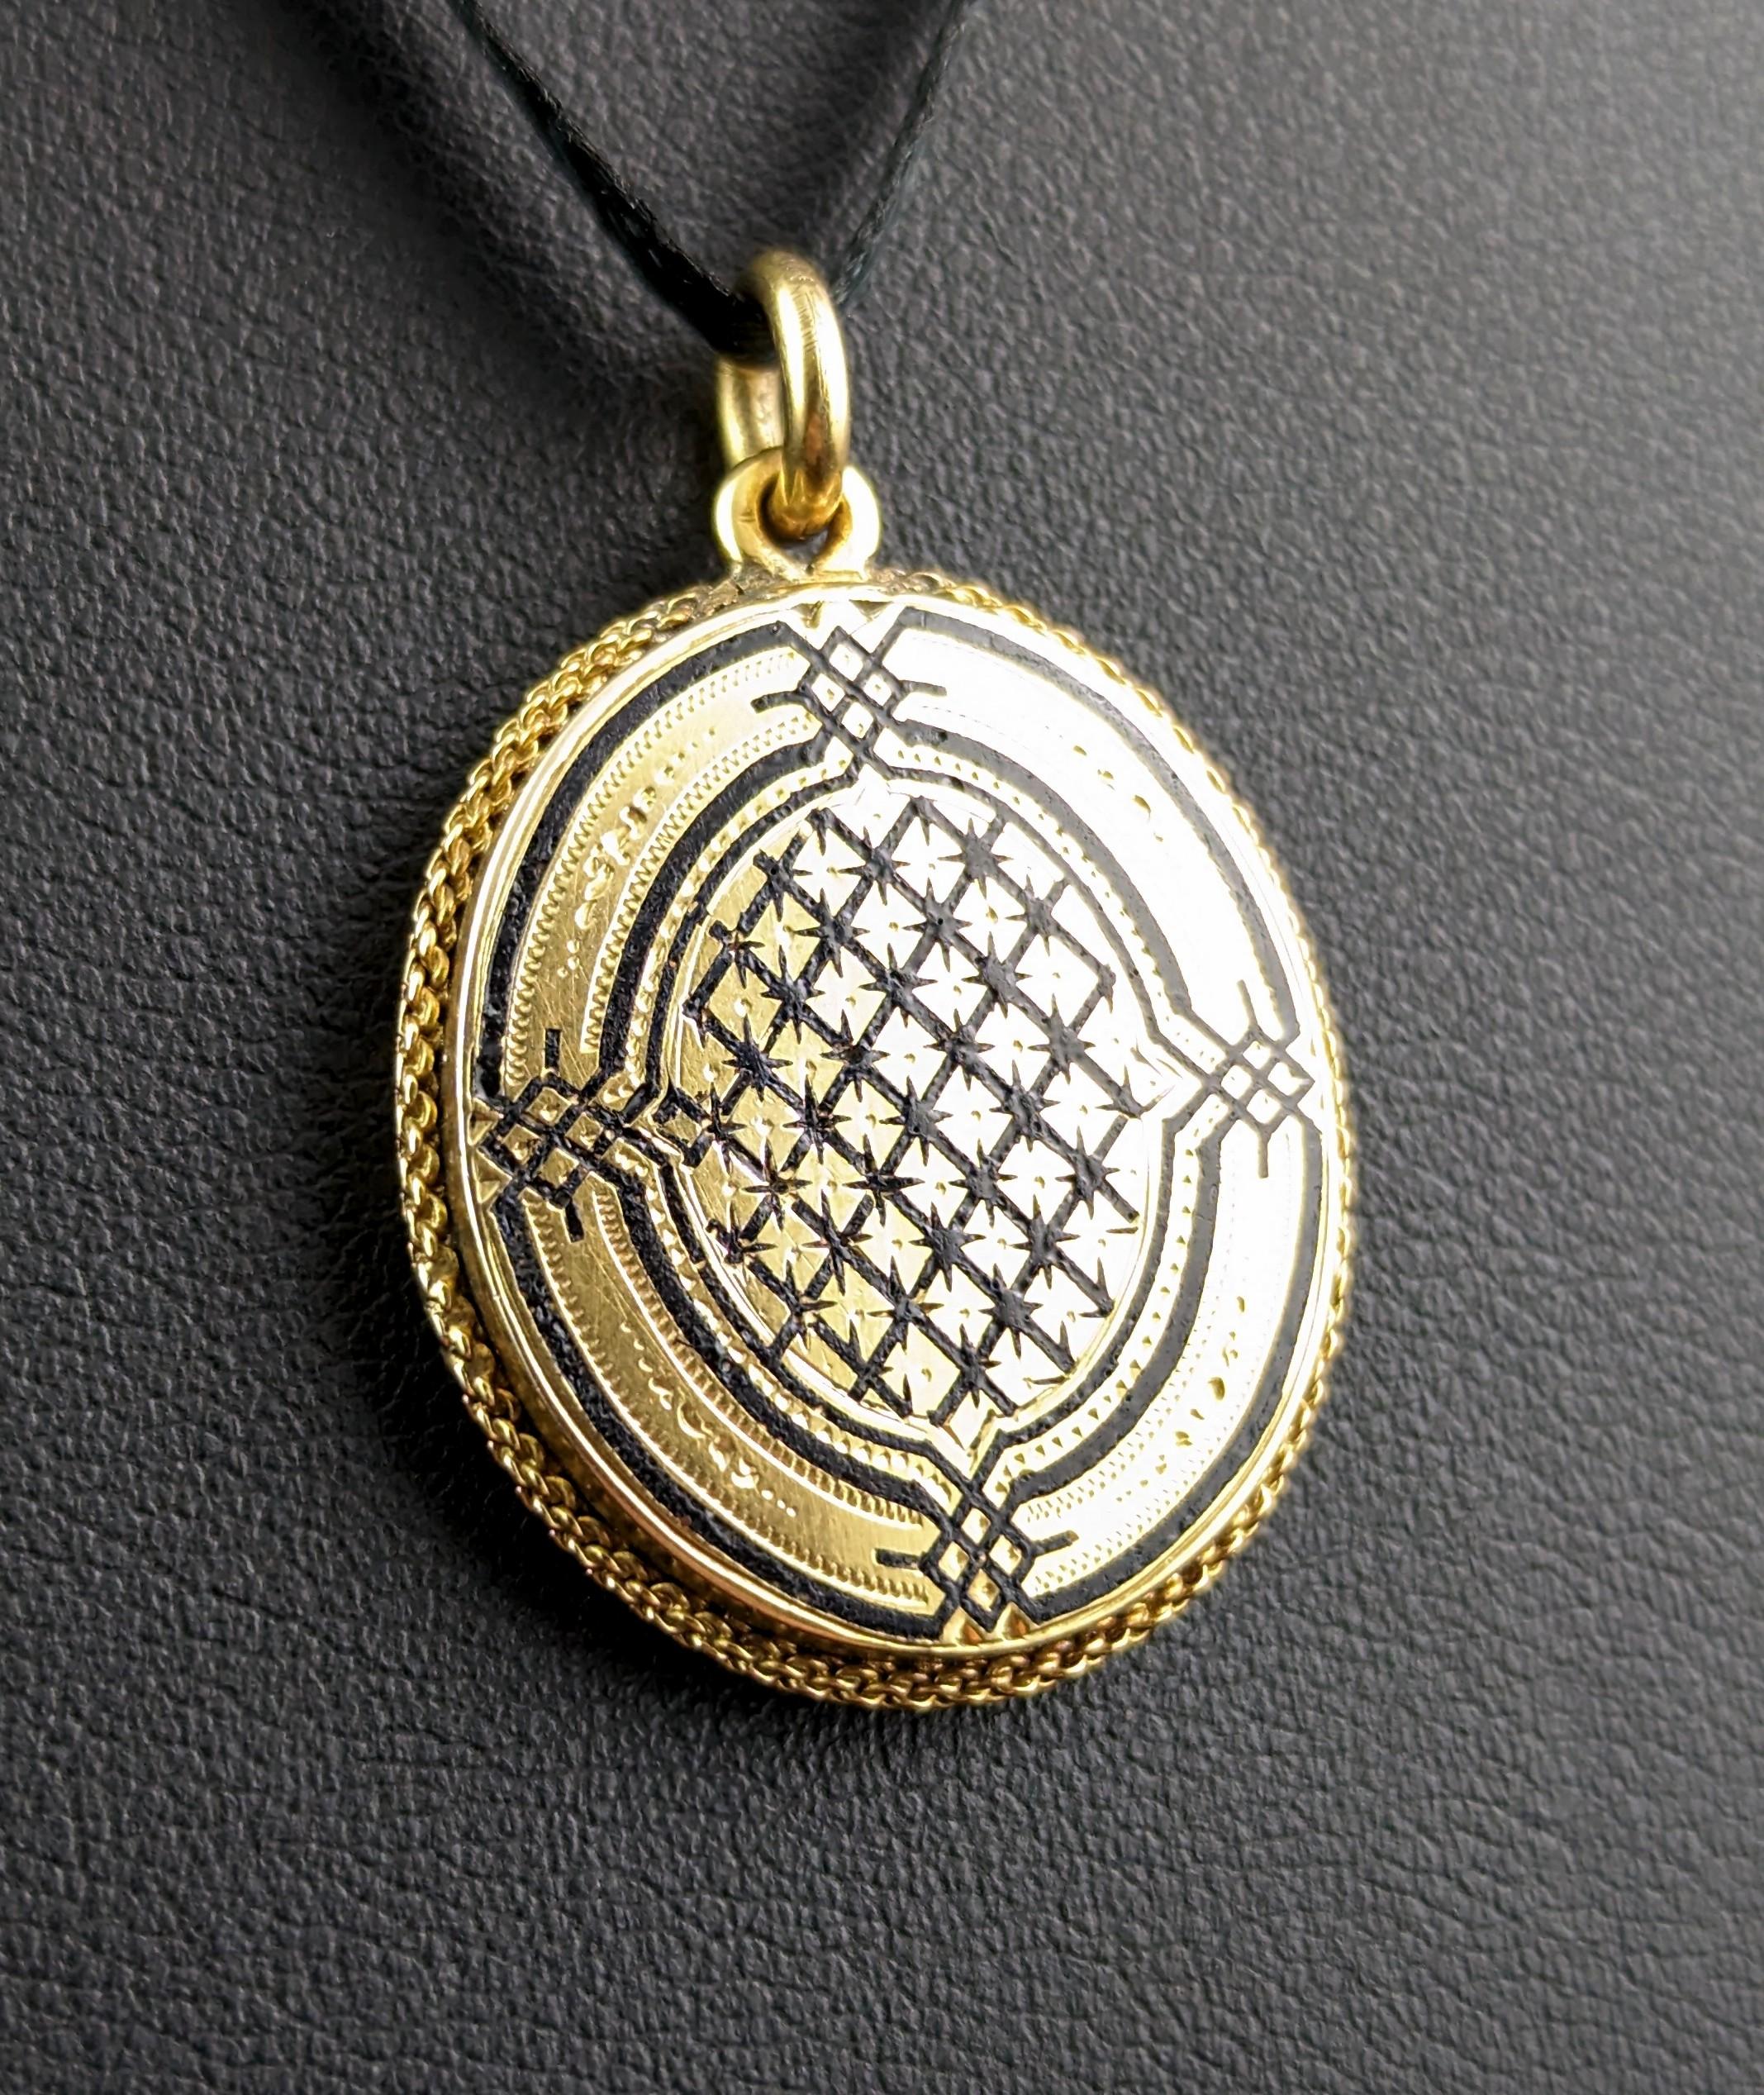 This beautiful antique 18ct gold Mourning locket is really a very special piece.

Rich aged 18ct gold with an unusual and alluring honeycomb pattern applied to the front in inky black enamel, black being a commonly used colour on Mourning jewels and